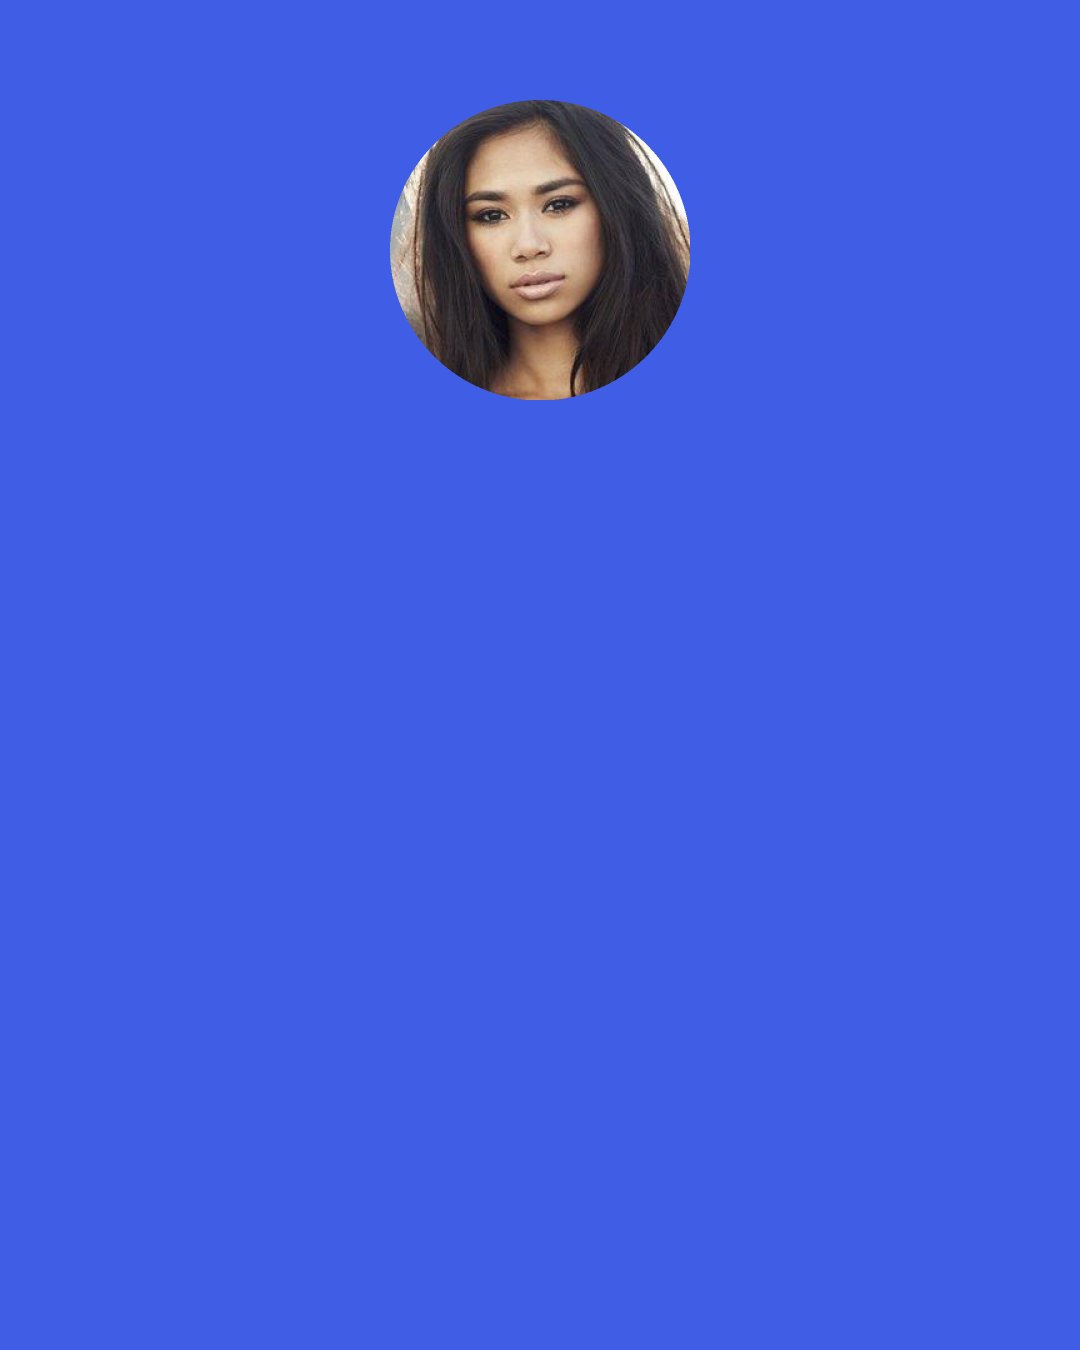 Jessica Sanchez: A lot of people who wanted to audition for Idol have asked me: “What should I do?” or “How to I prepare myself?” I always told them: “Just go in and believe in yourself.”